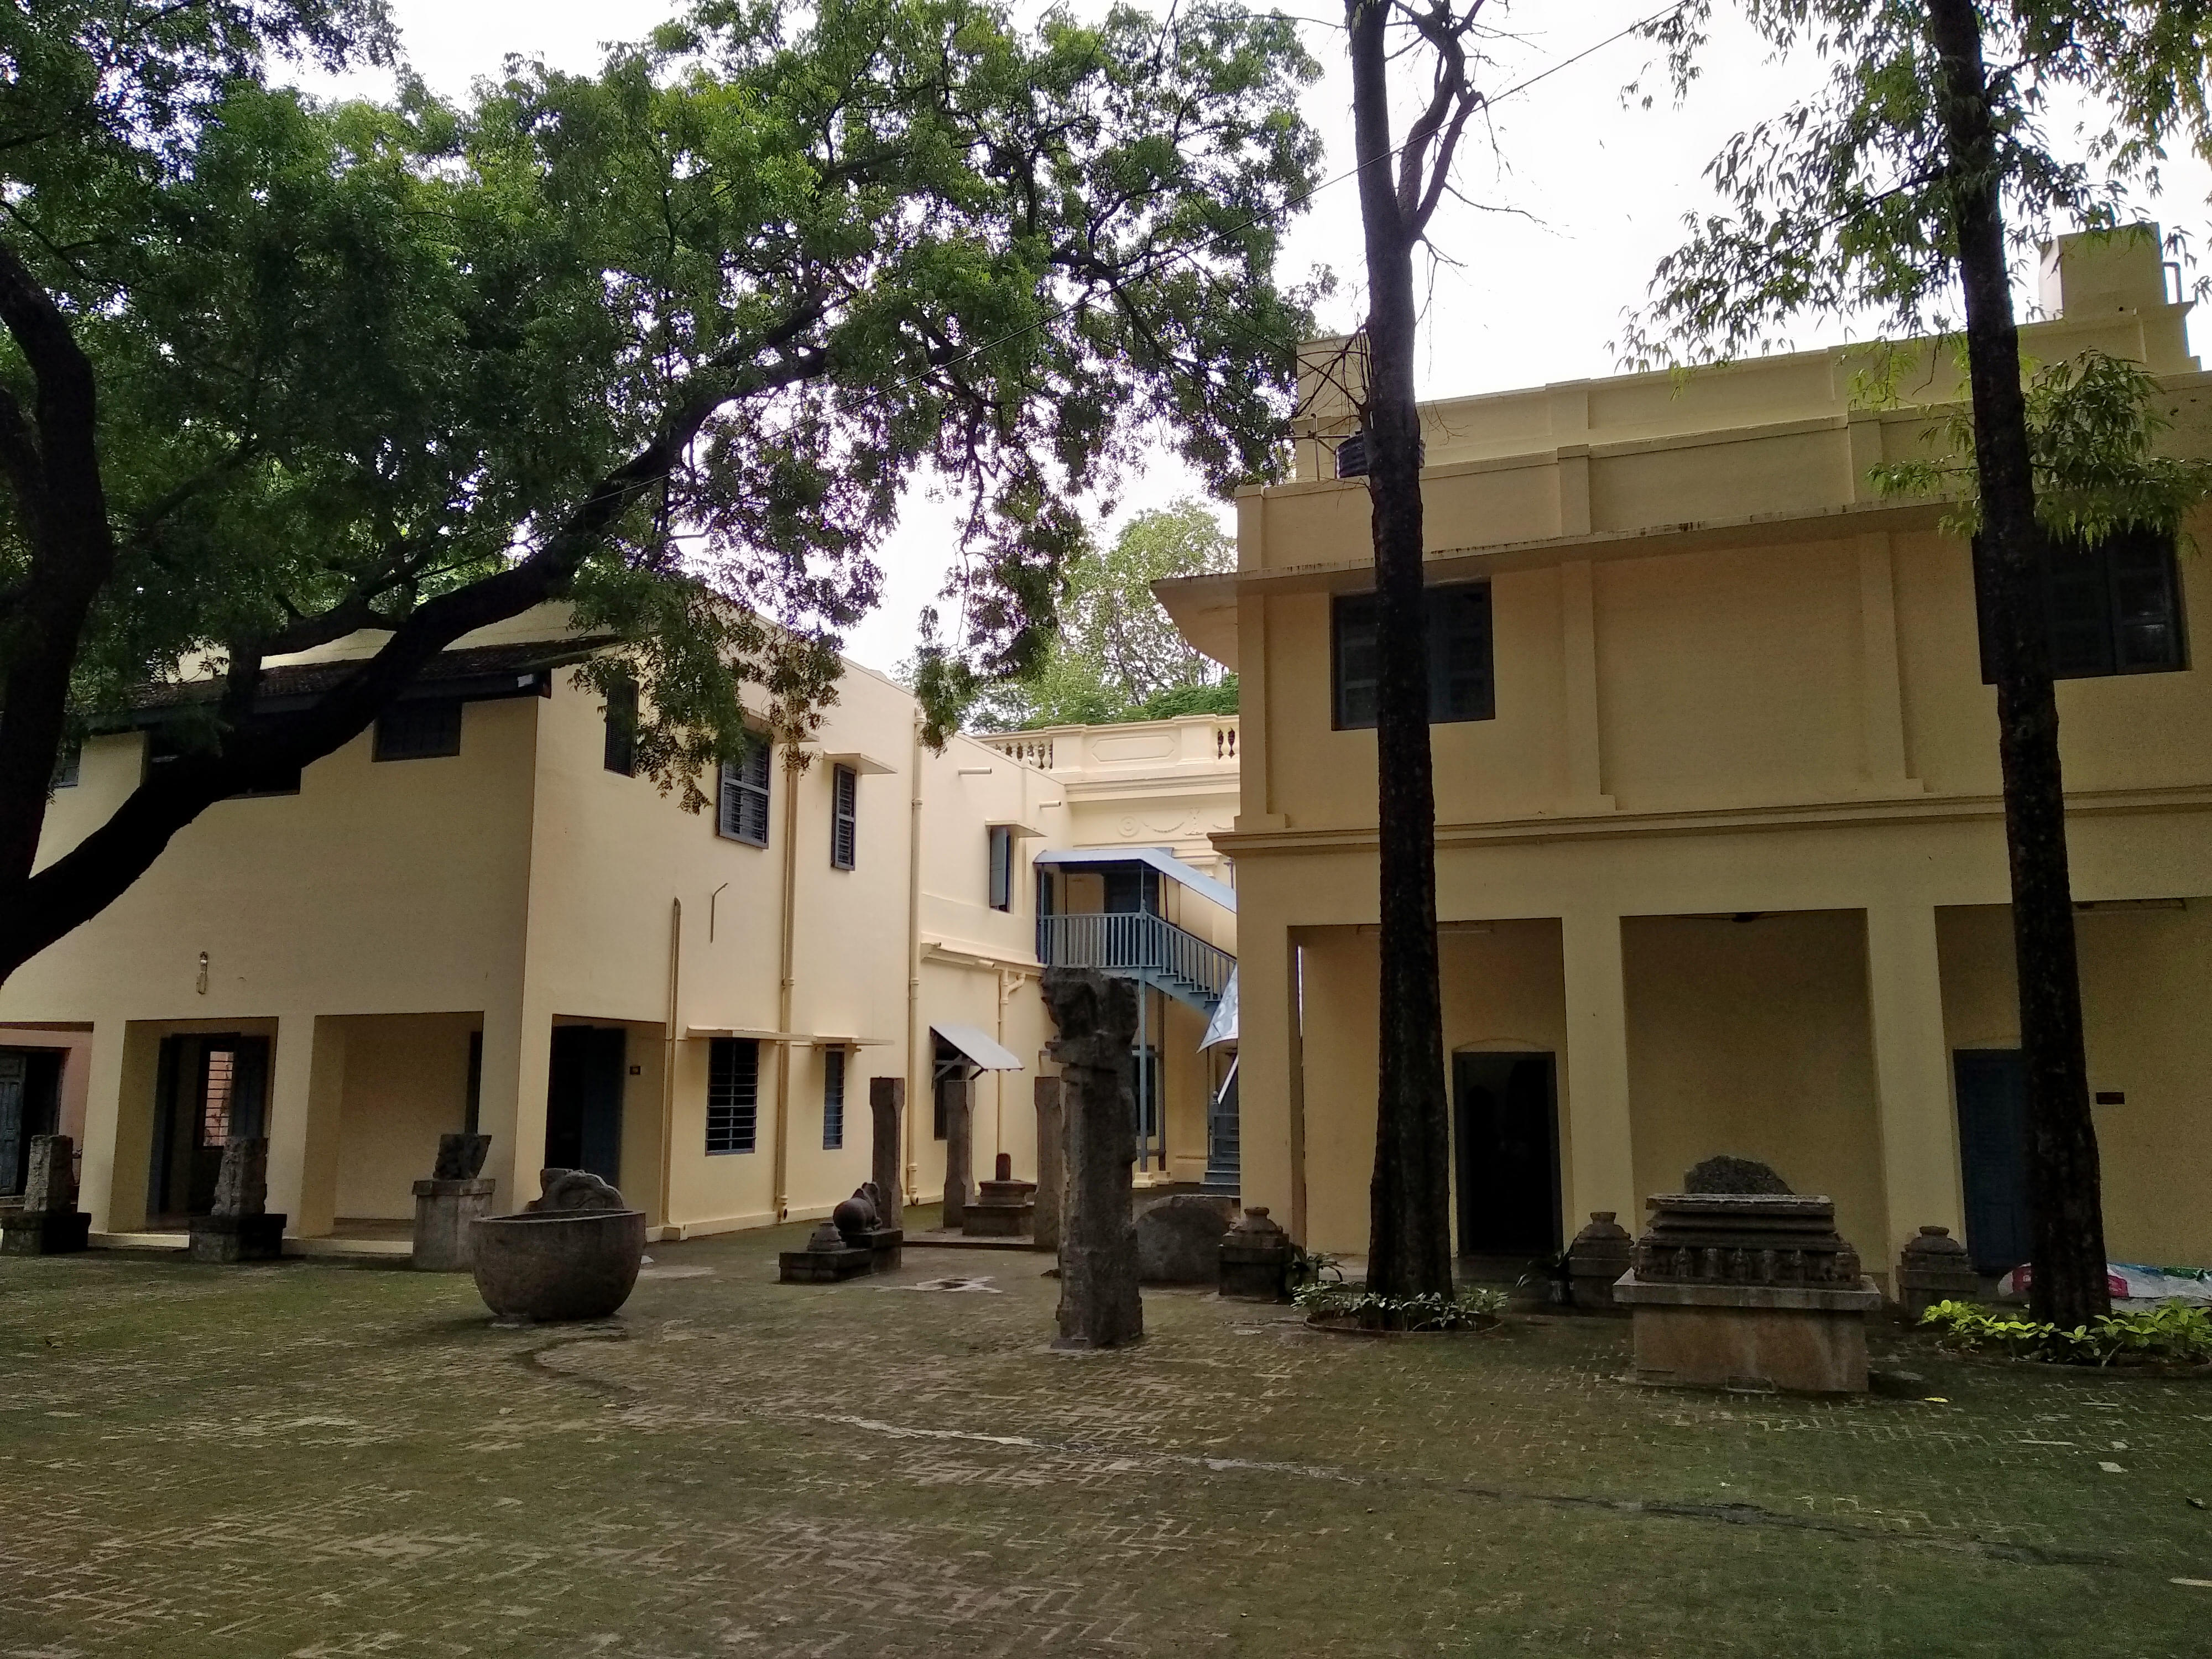 Archaeological Survey Of India Museum